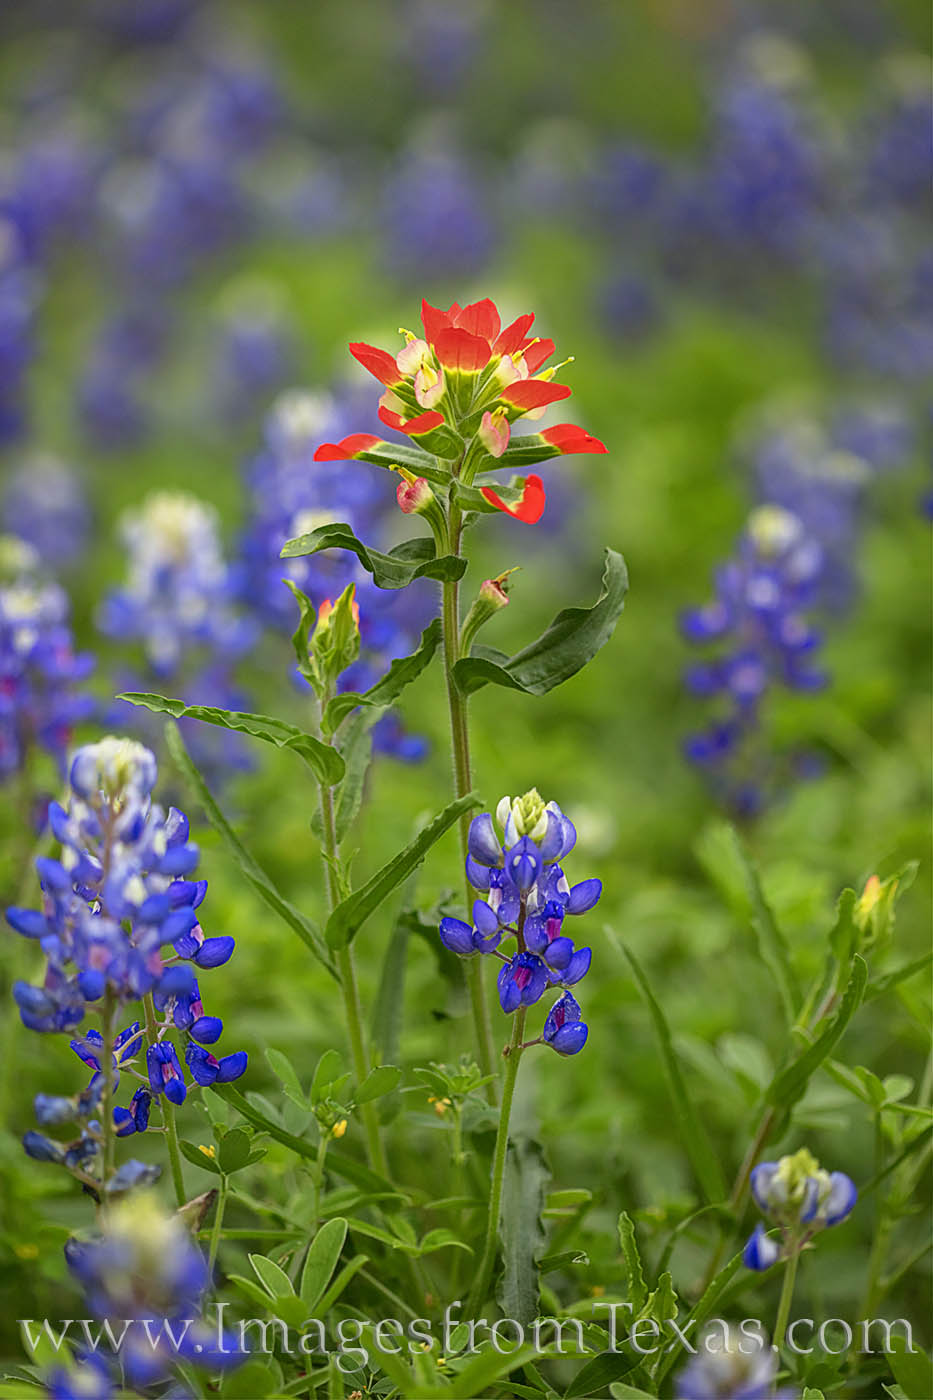 An Indian Paintbrush rises among a patch of Hill Country bluebonnets on a warm spring afternoon.